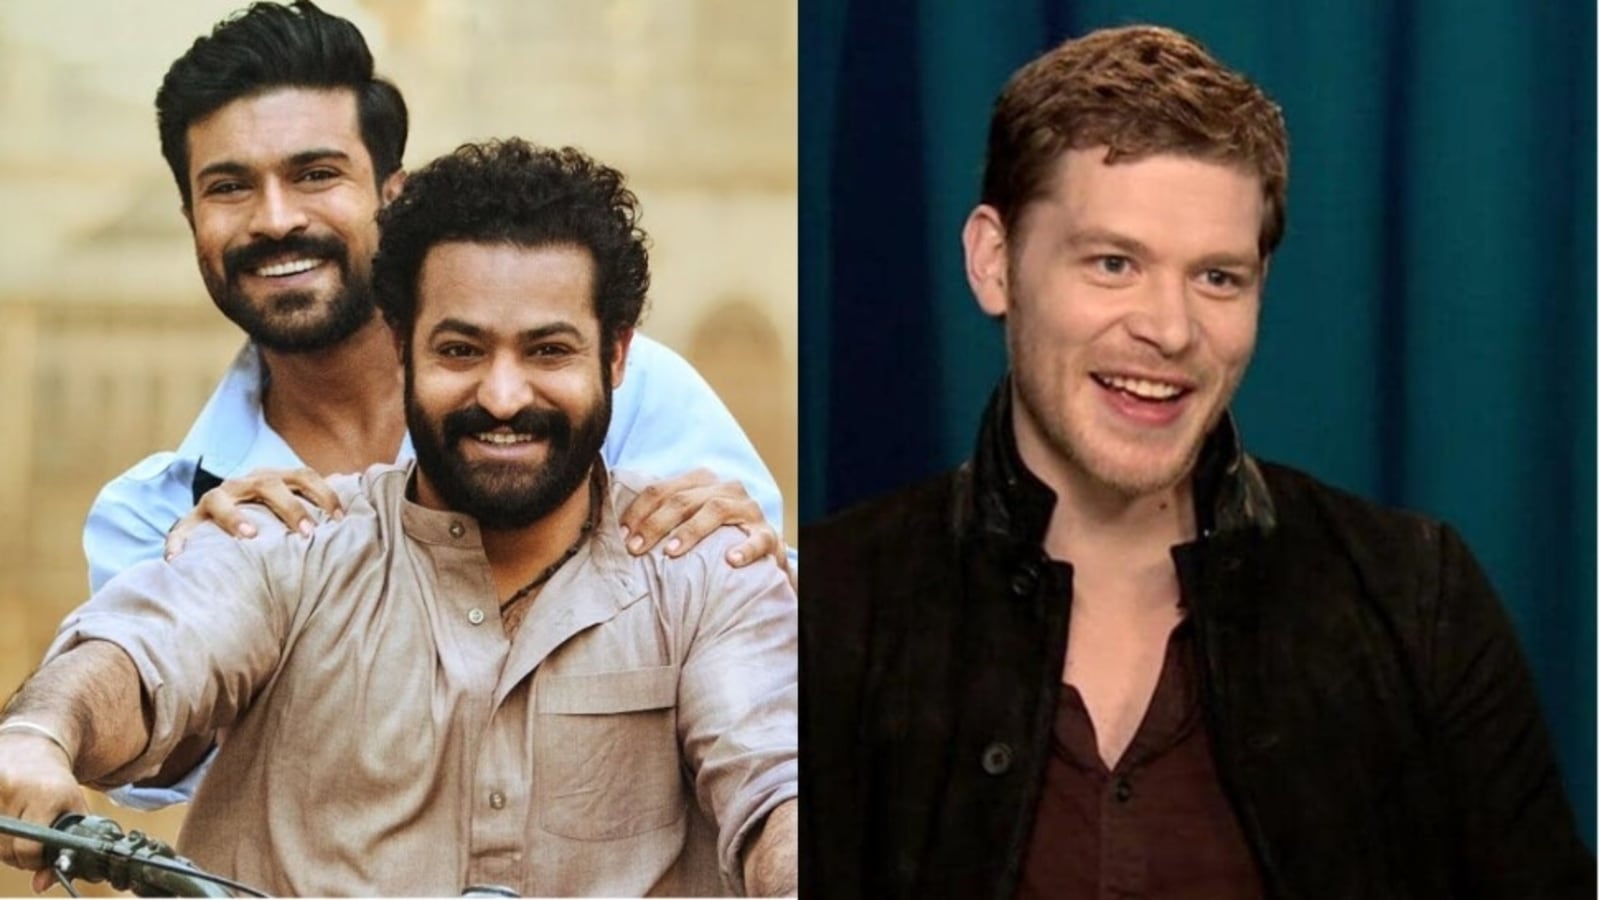 SS Rajamouli’s ‘absolute masterpiece’ RRR praised by The Vampire Diaries’ Joseph Morgan: ‘We laughed, cried, gasped’